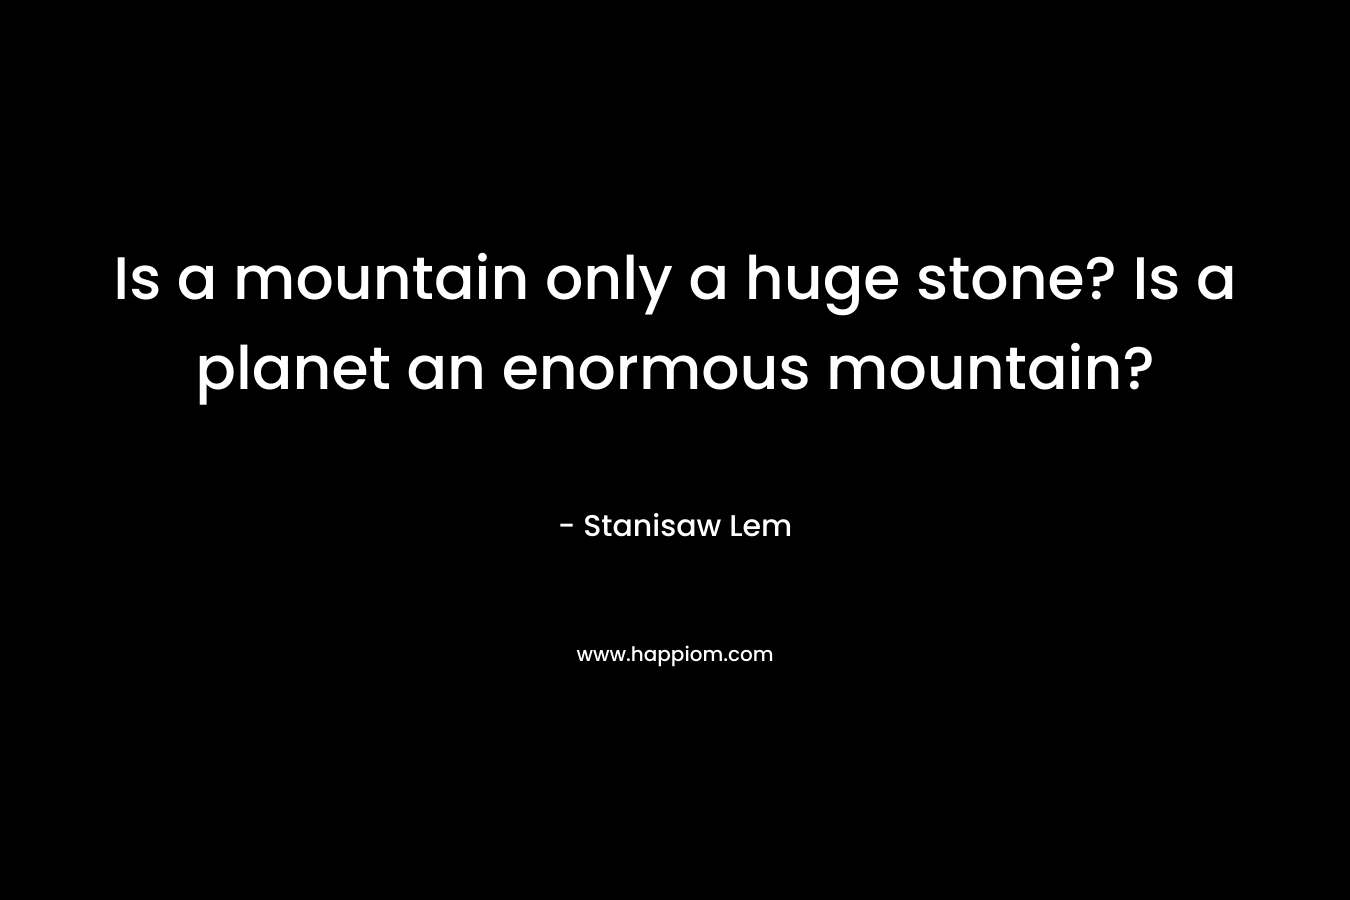 Is a mountain only a huge stone? Is a planet an enormous mountain? – Stanisaw Lem